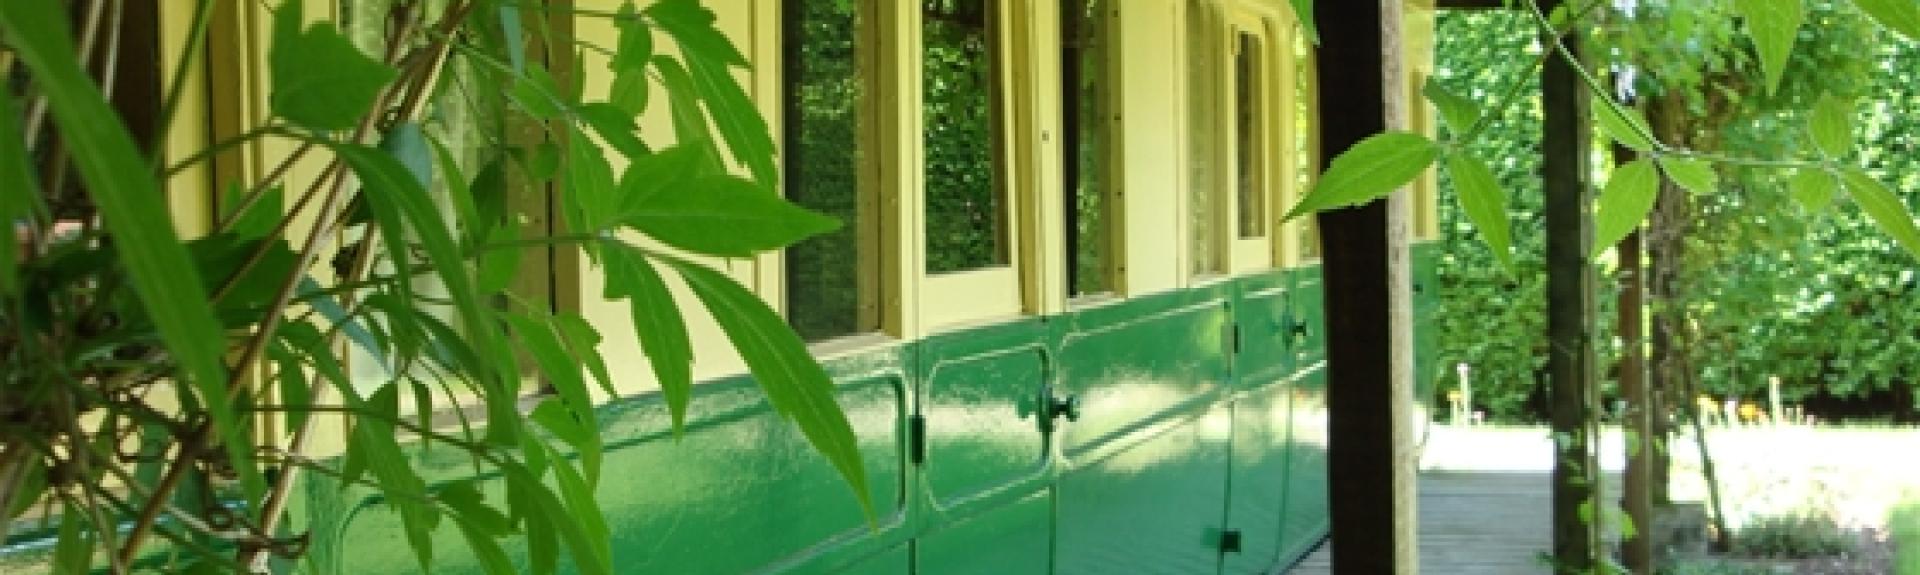 The exterior of restored railway carriage converted into self-ctering holiday accommodation with a vine-covered sun deck.